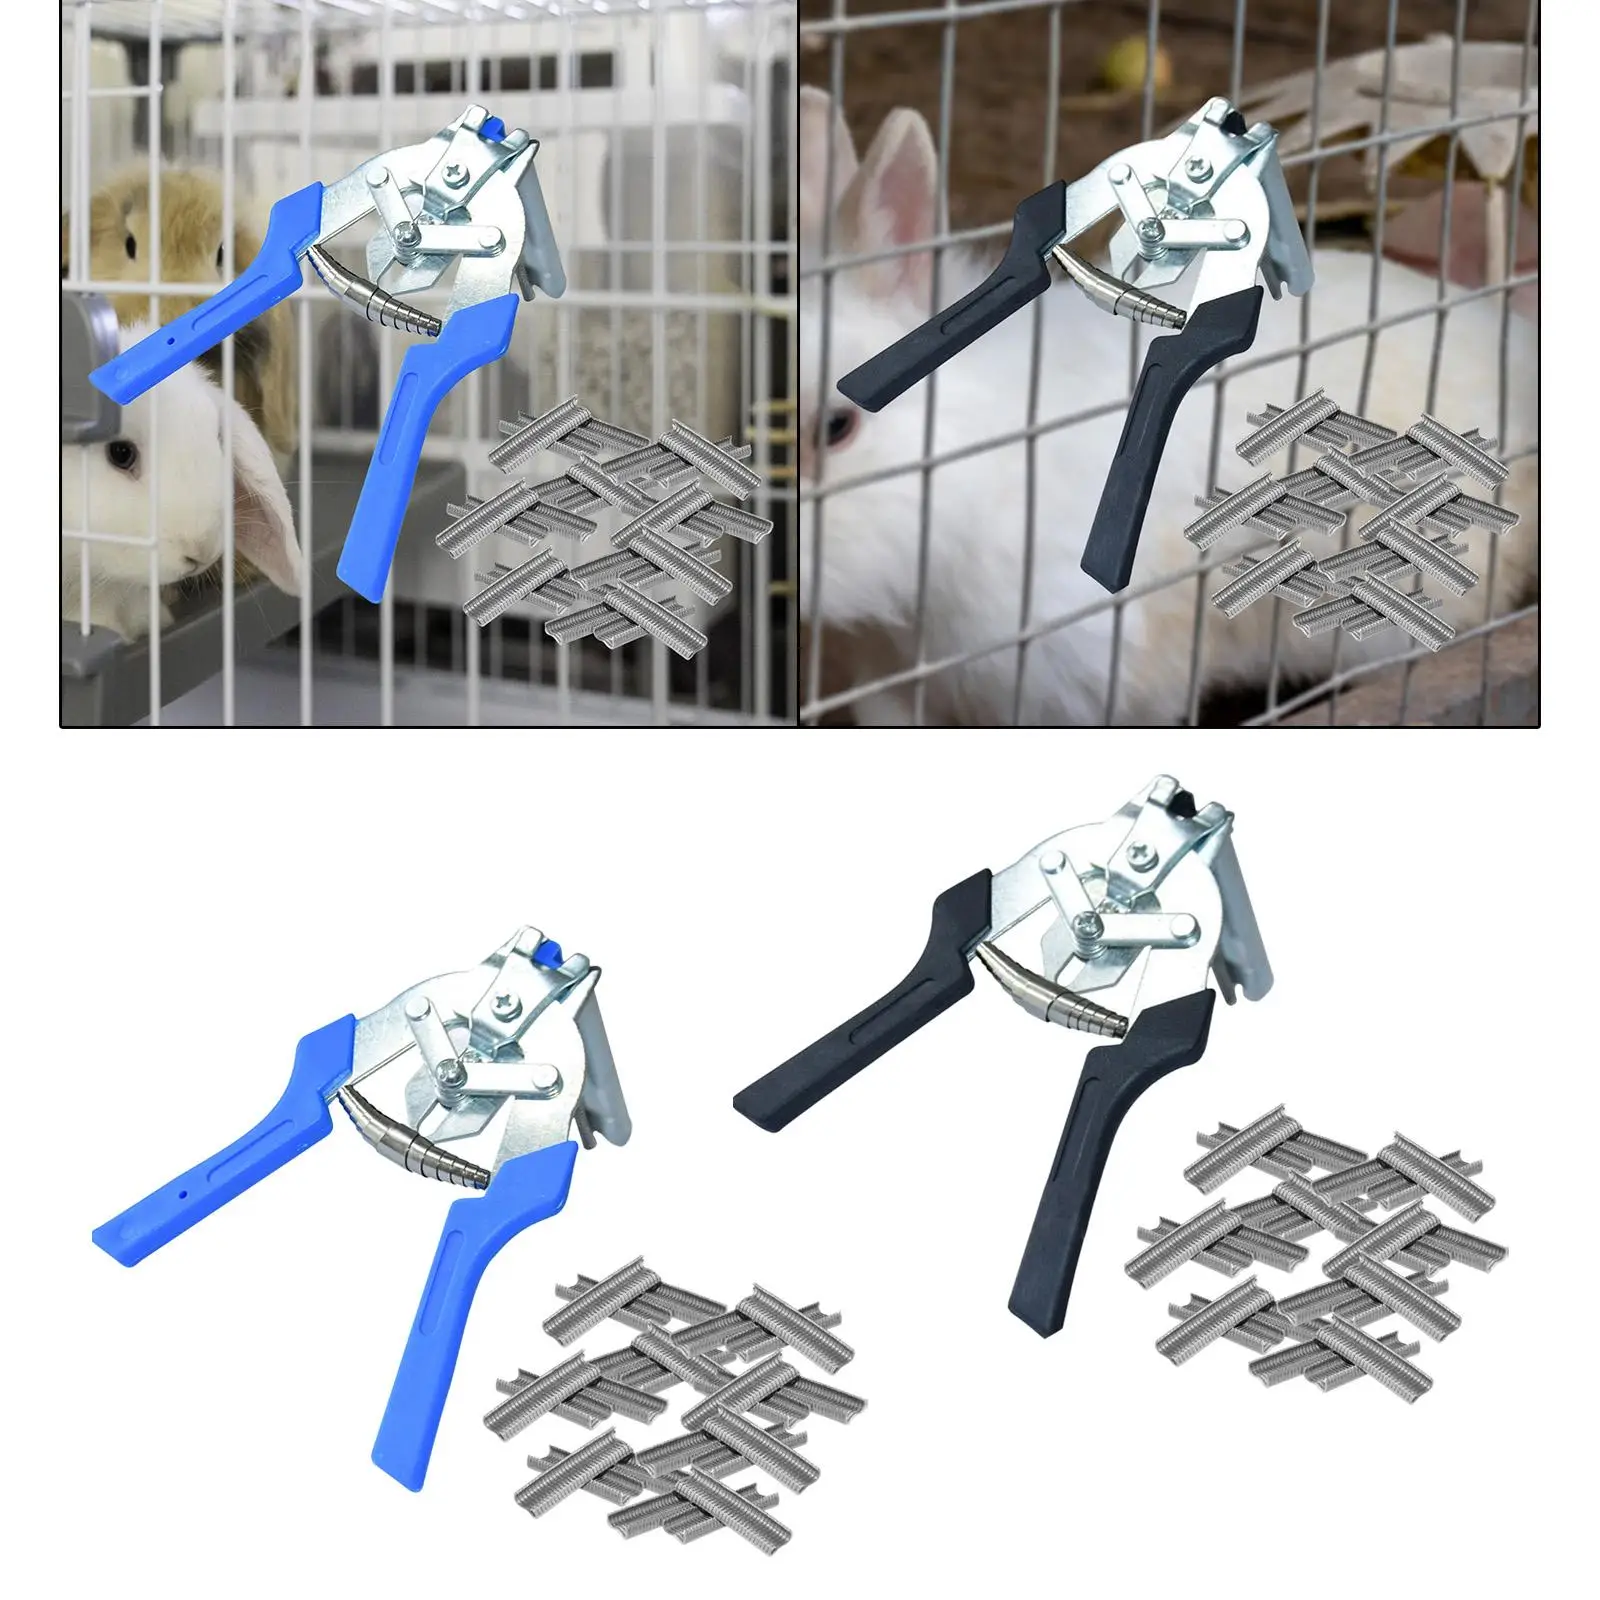 Multifunction Hog Ring Pliers M Type Pliers with Clips Clamp for Poultry Cage Rabbit Cage Bird Cage Chicken Cage